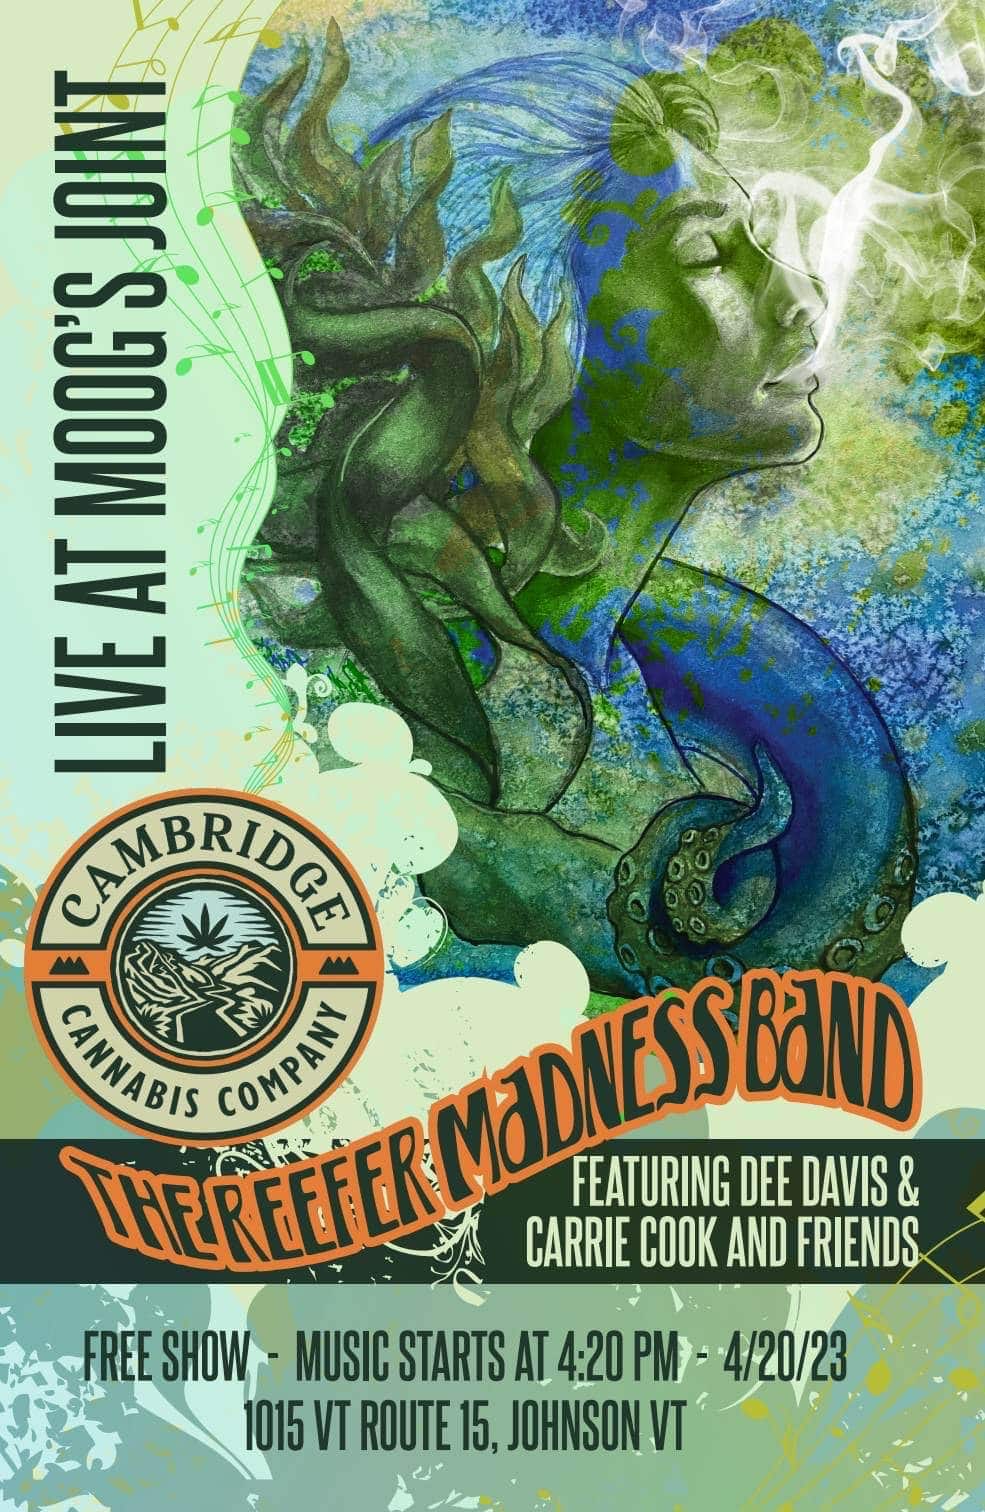 Moogs Reefer Maddness Event